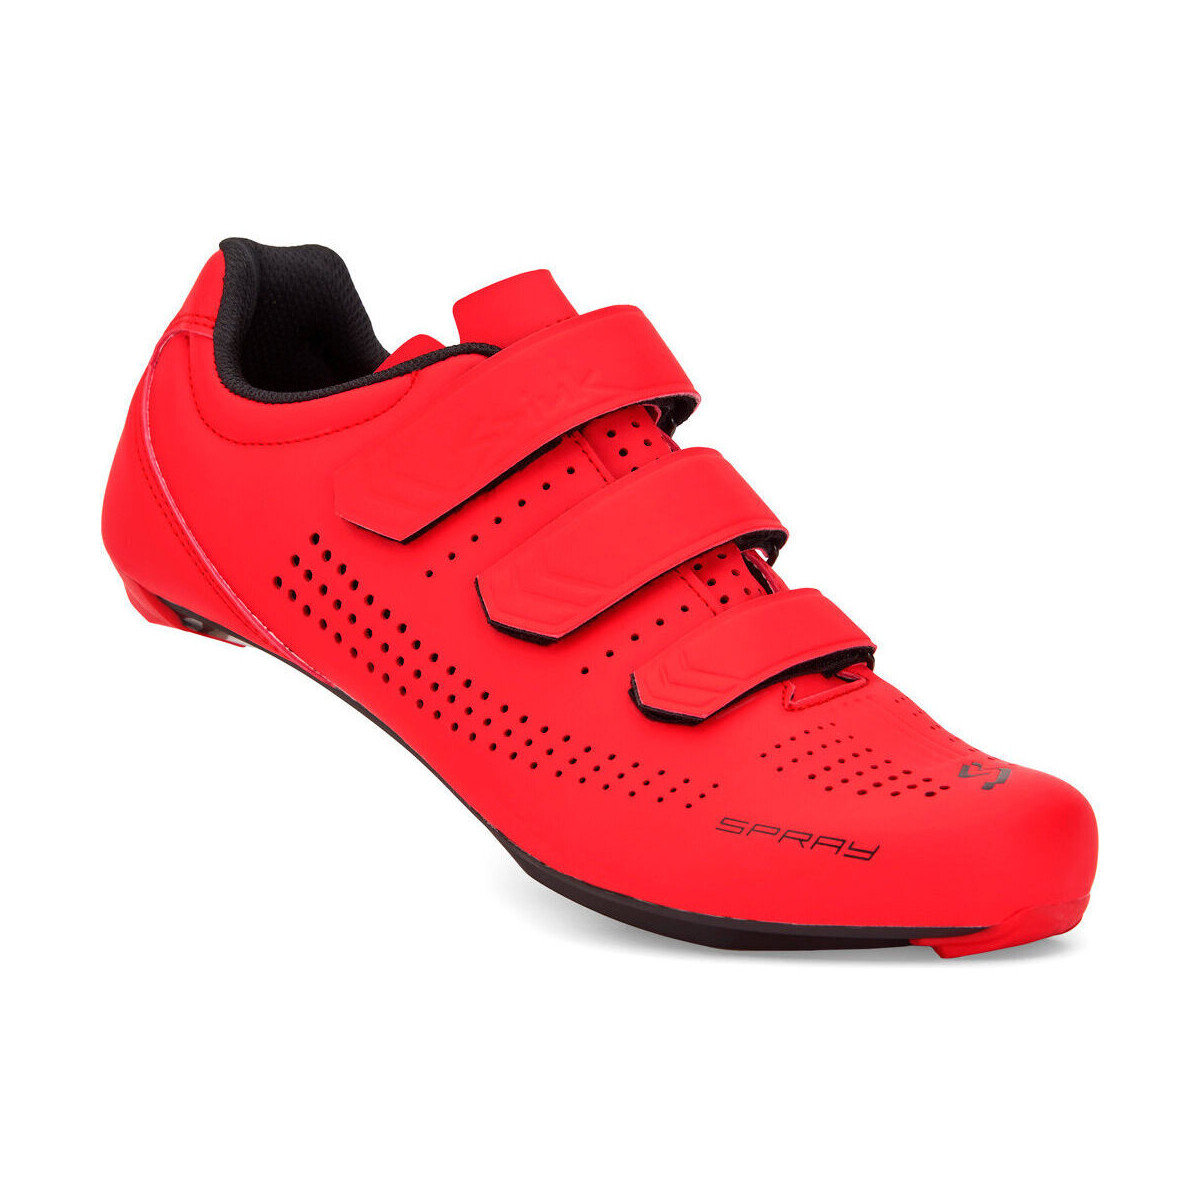 Chaussures Cyclisme Spiuk ZAPATILLA SPRAY ROAD UNISEX Rouge